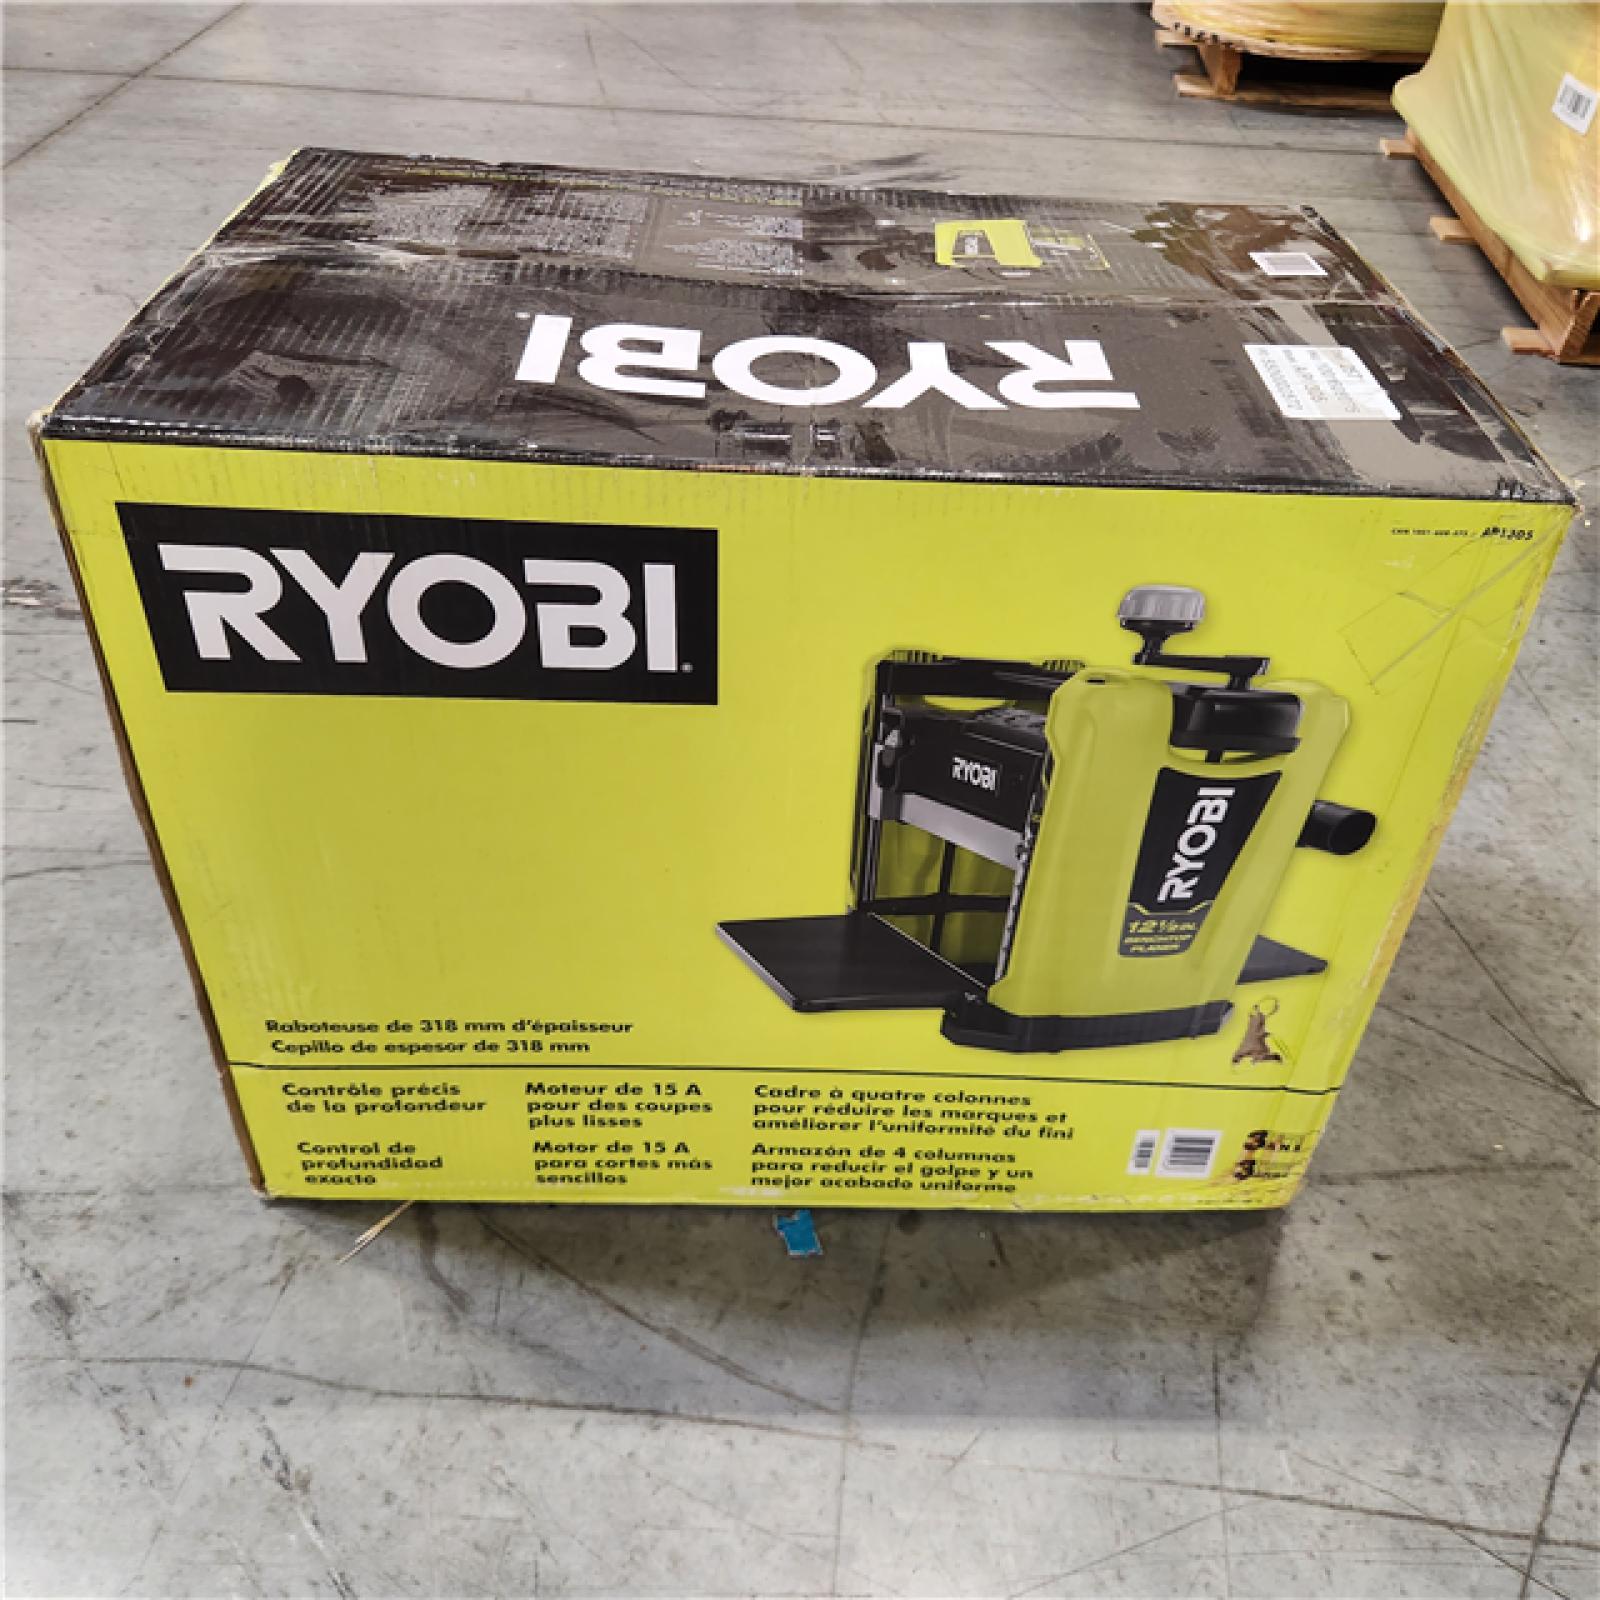 NEW! RYOBI 15 Amp 12-1/2 in. Corded Thickness Planer with Planer Knives, Knife Removal Tool, Hex Key and Dust Hood